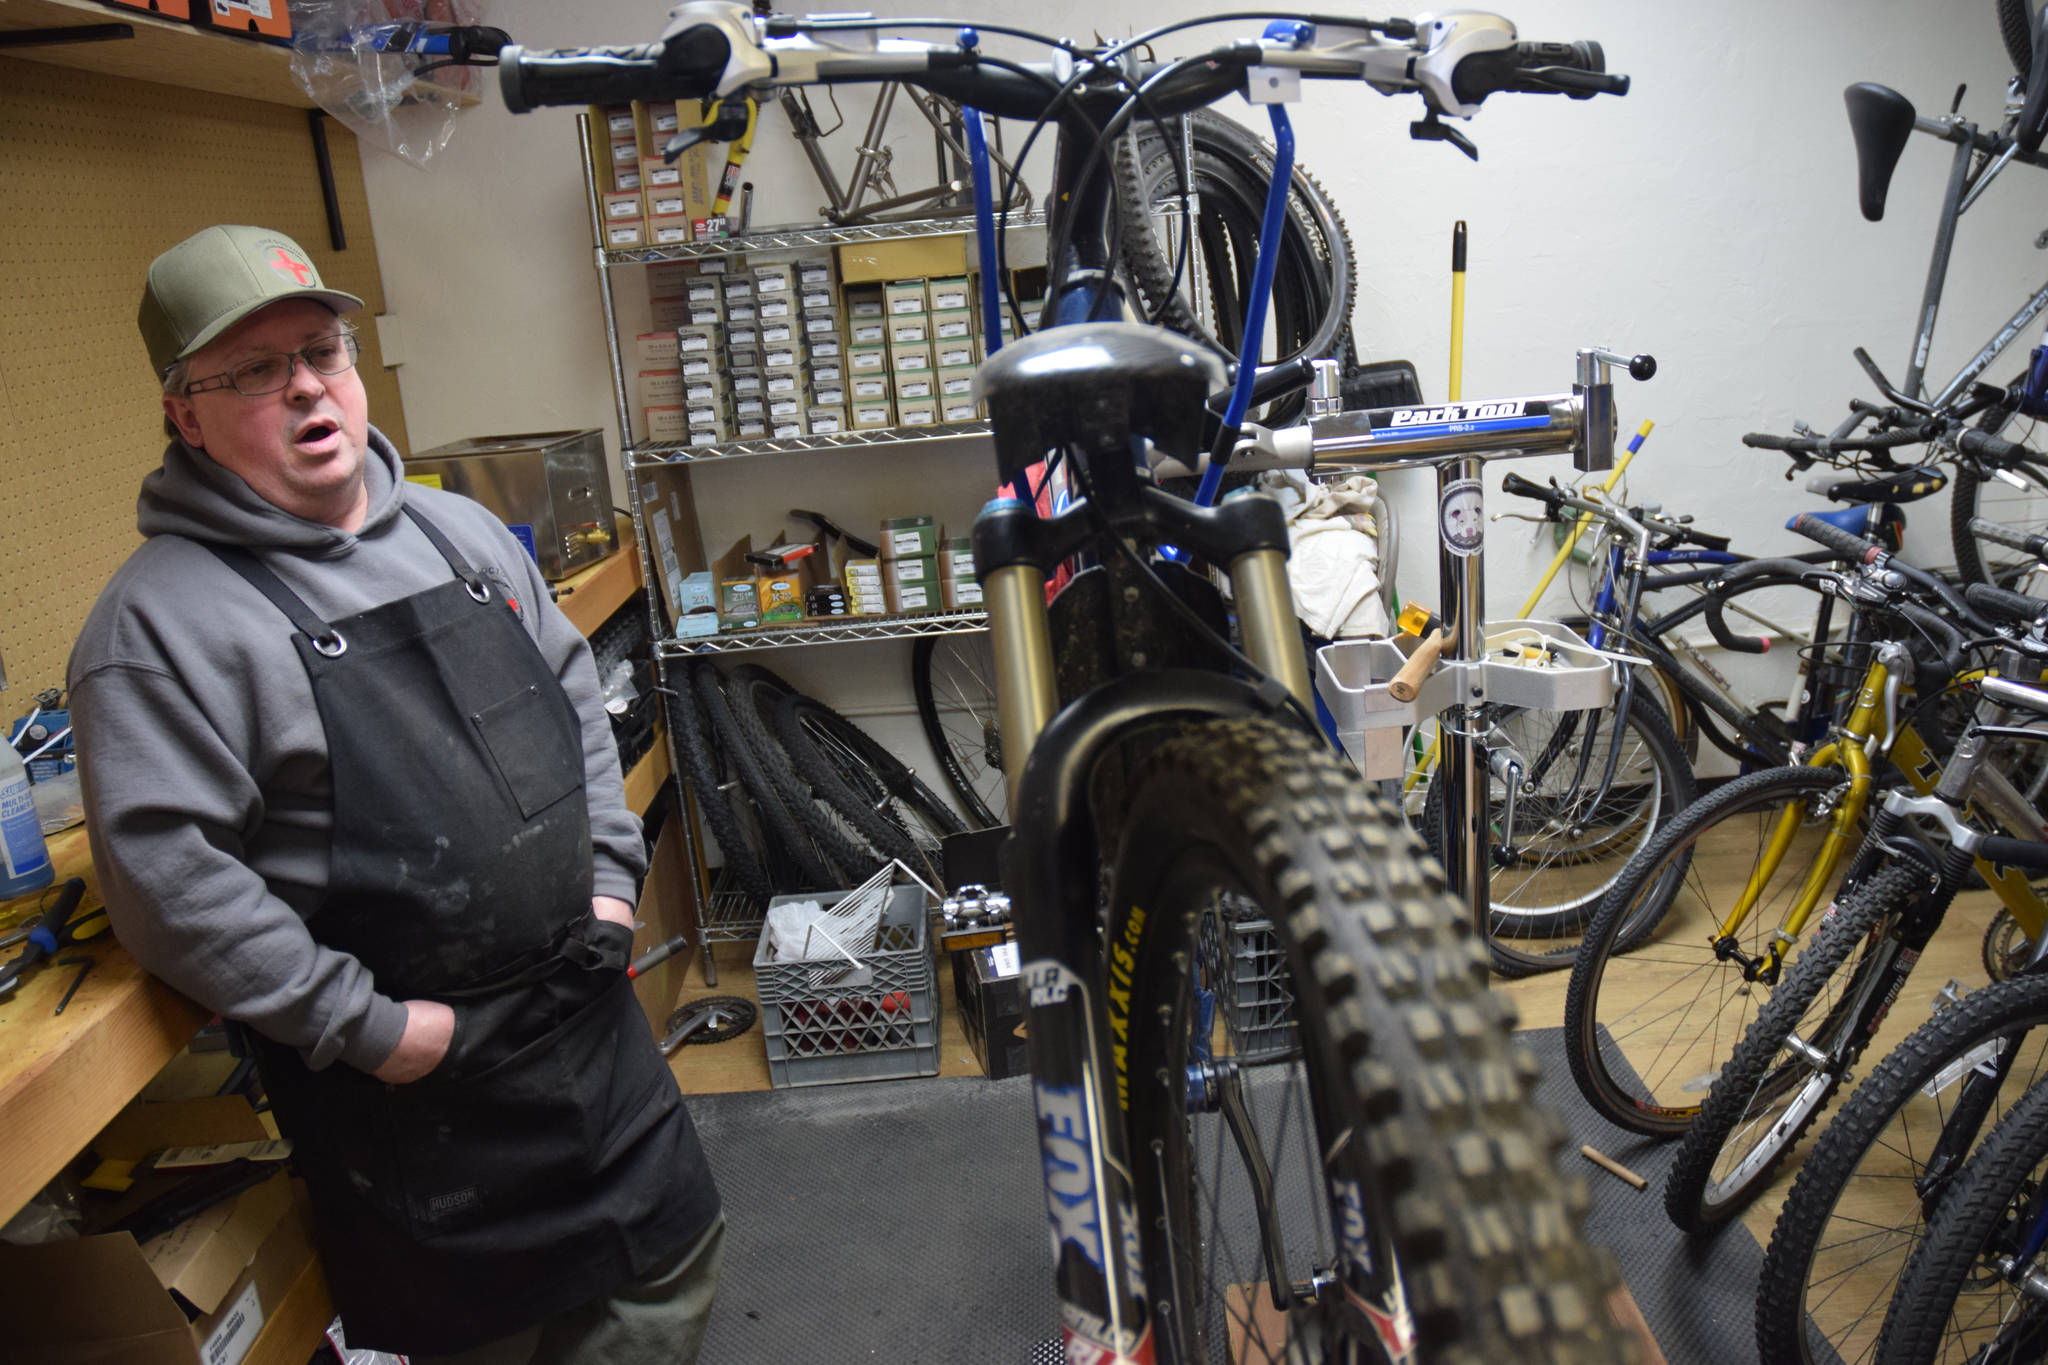 Ken Hill, owner of the newly-opened Bike Doctor shop in the Mendenhall Valley, talks about plans for his business on Friday. (Kevin Gullufsen | Juneau Empire)